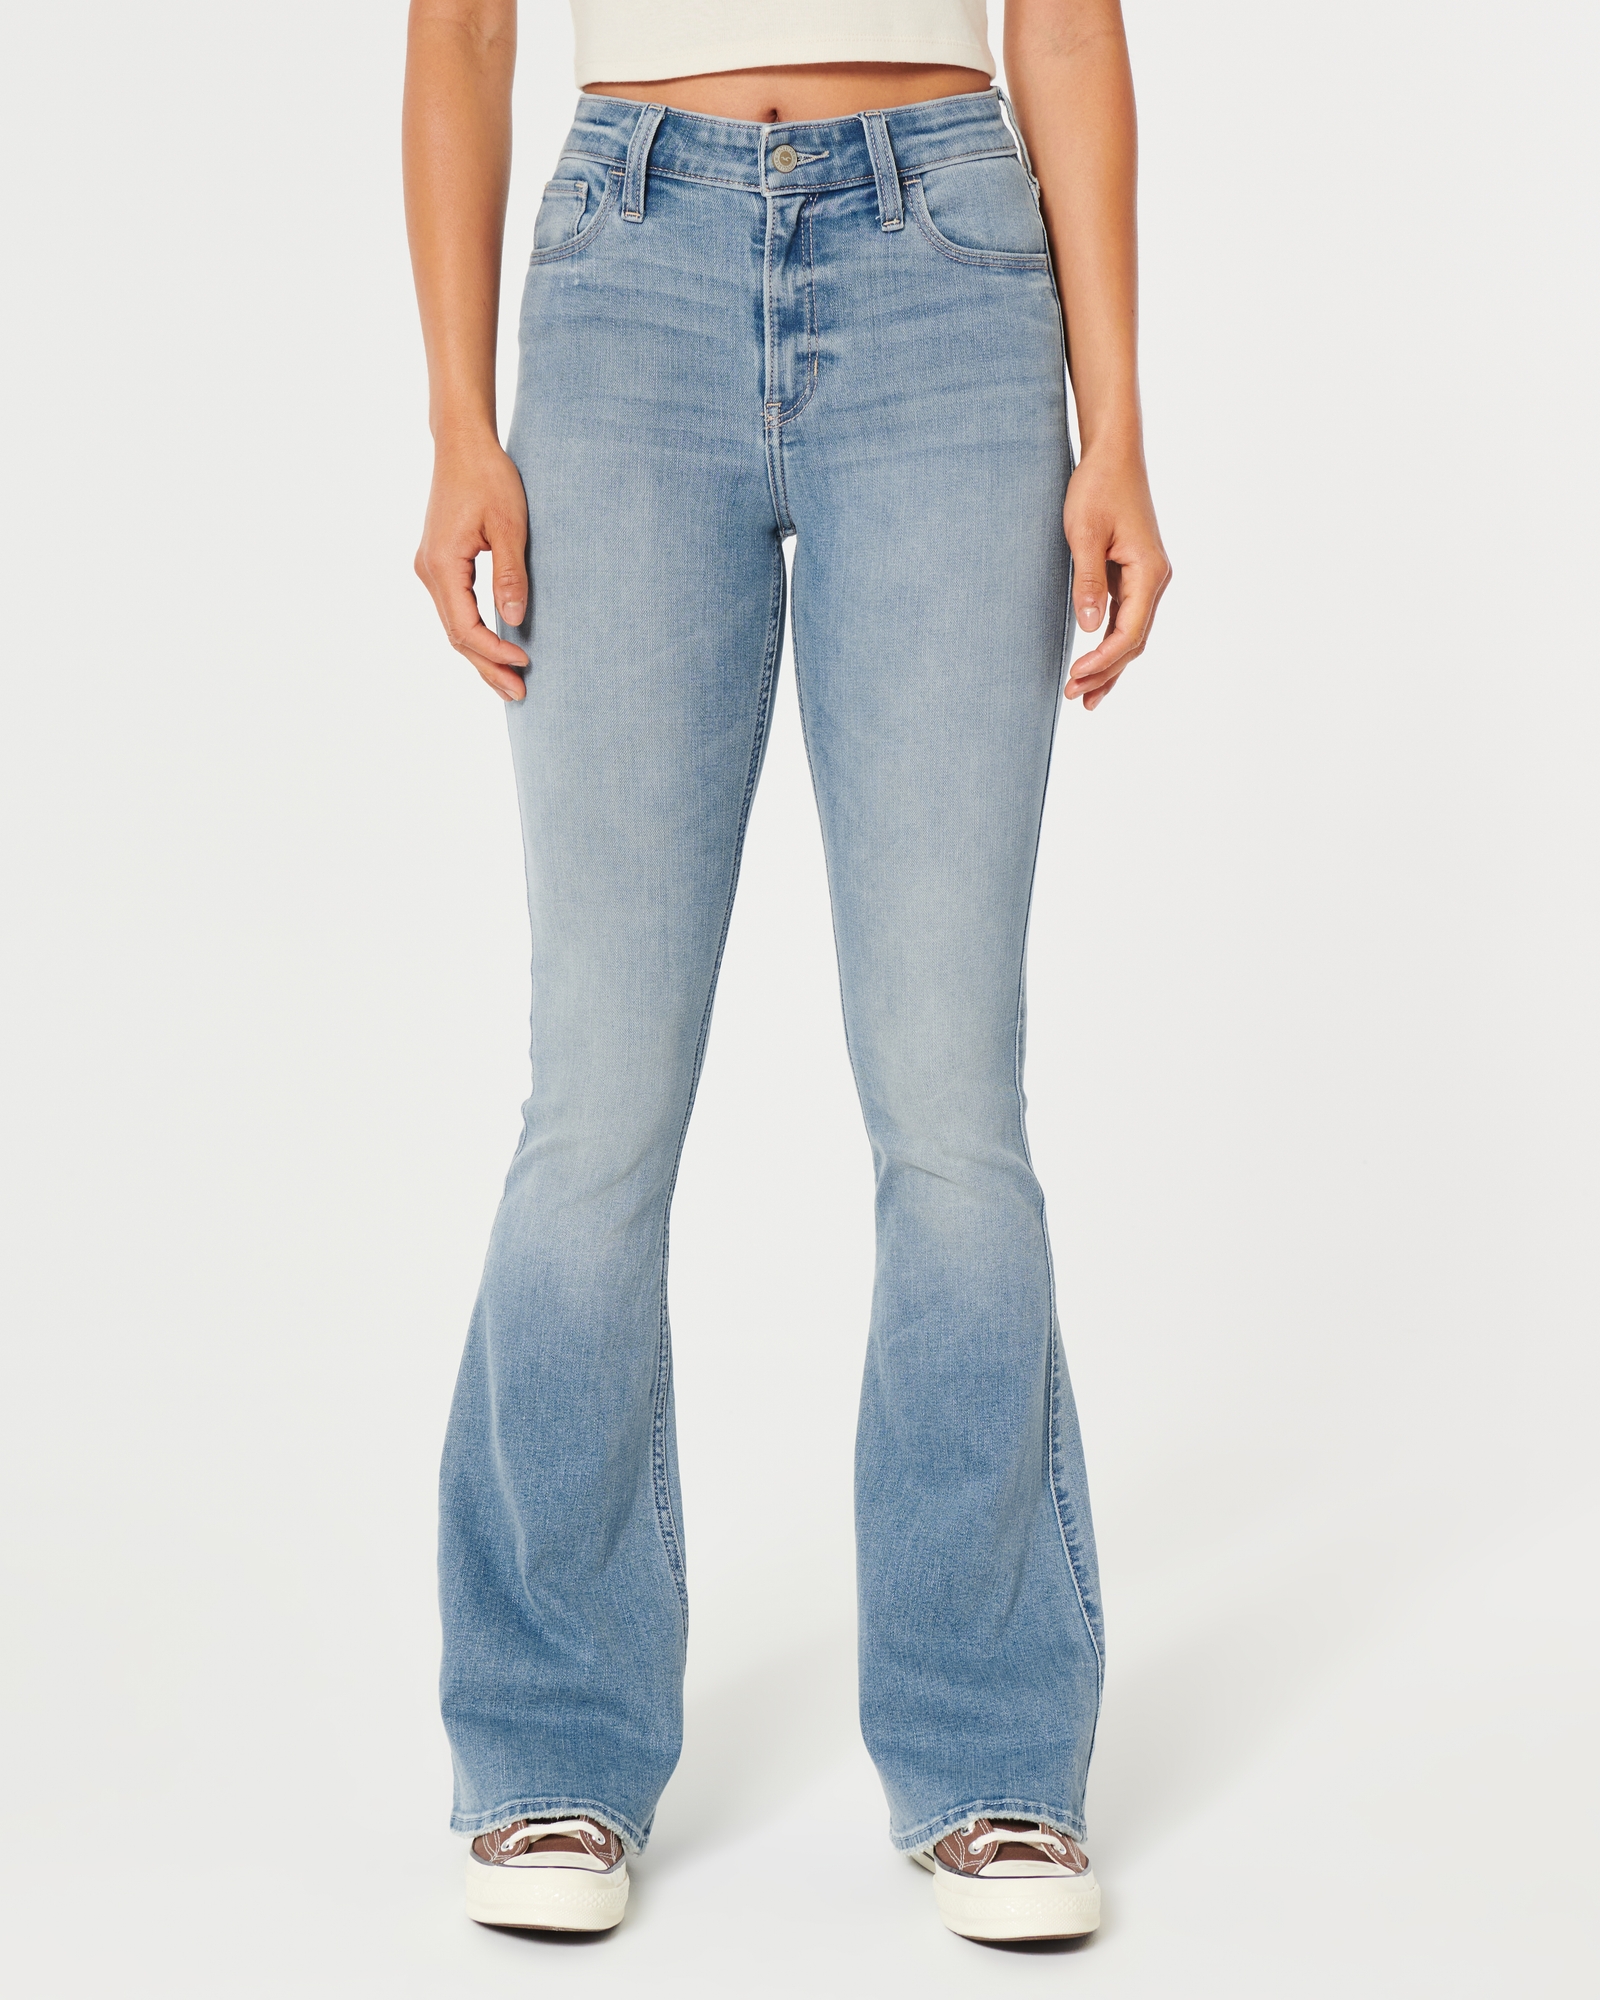 Hollister High Rise Flare Jeans Size 26 - $25 (50% Off Retail